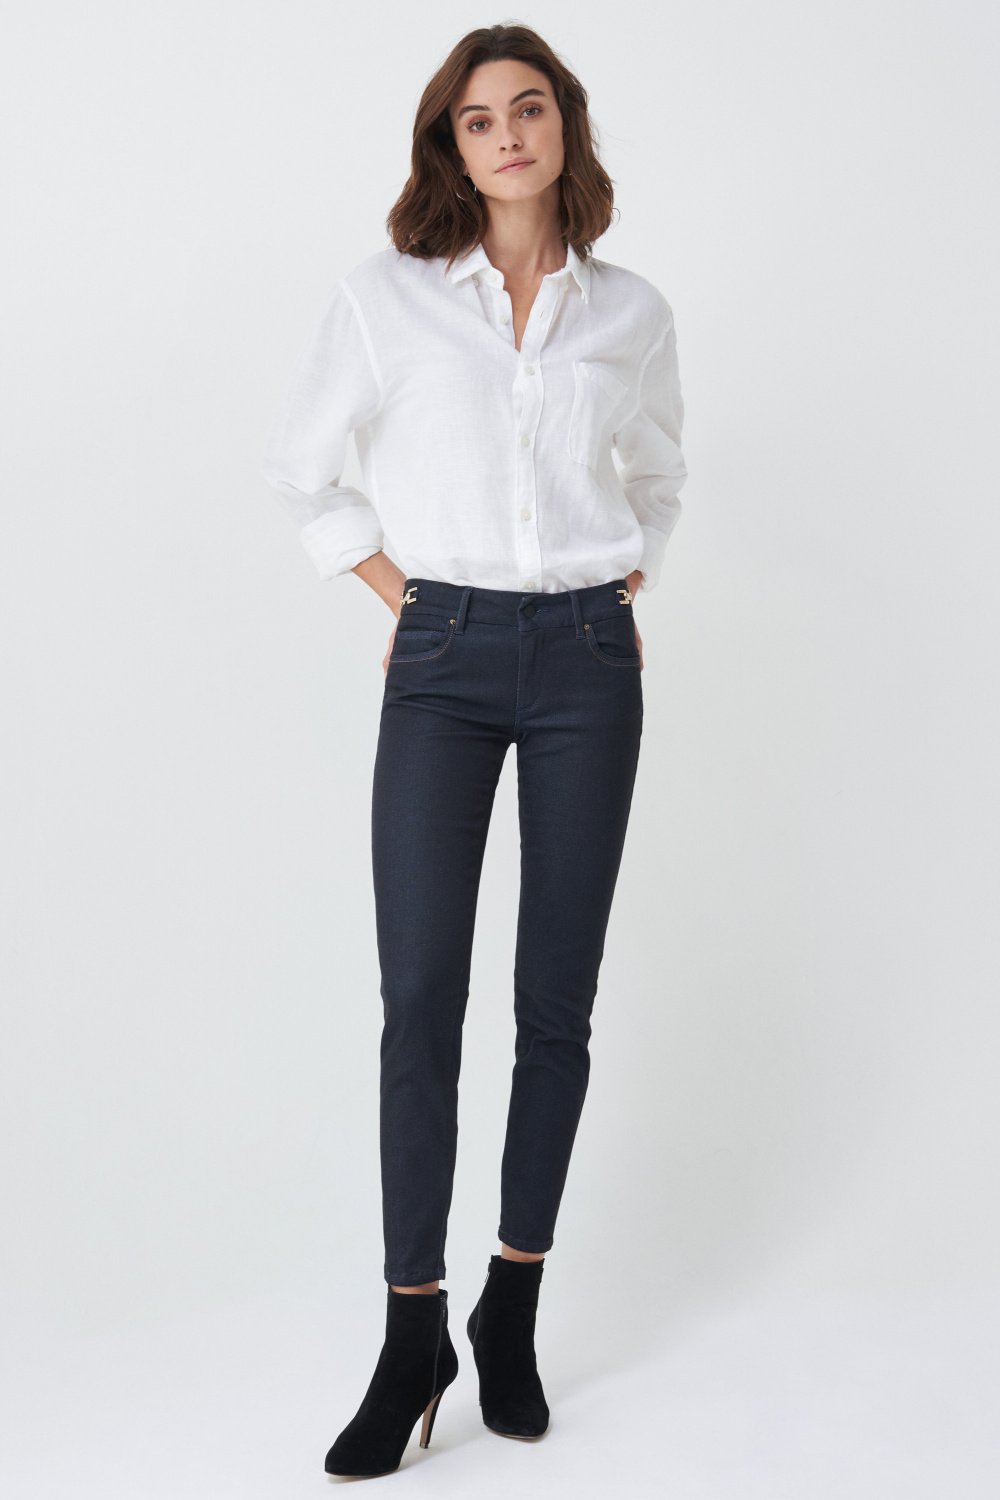 Push Up Wonder cropped jeans with belt detail - Salsa